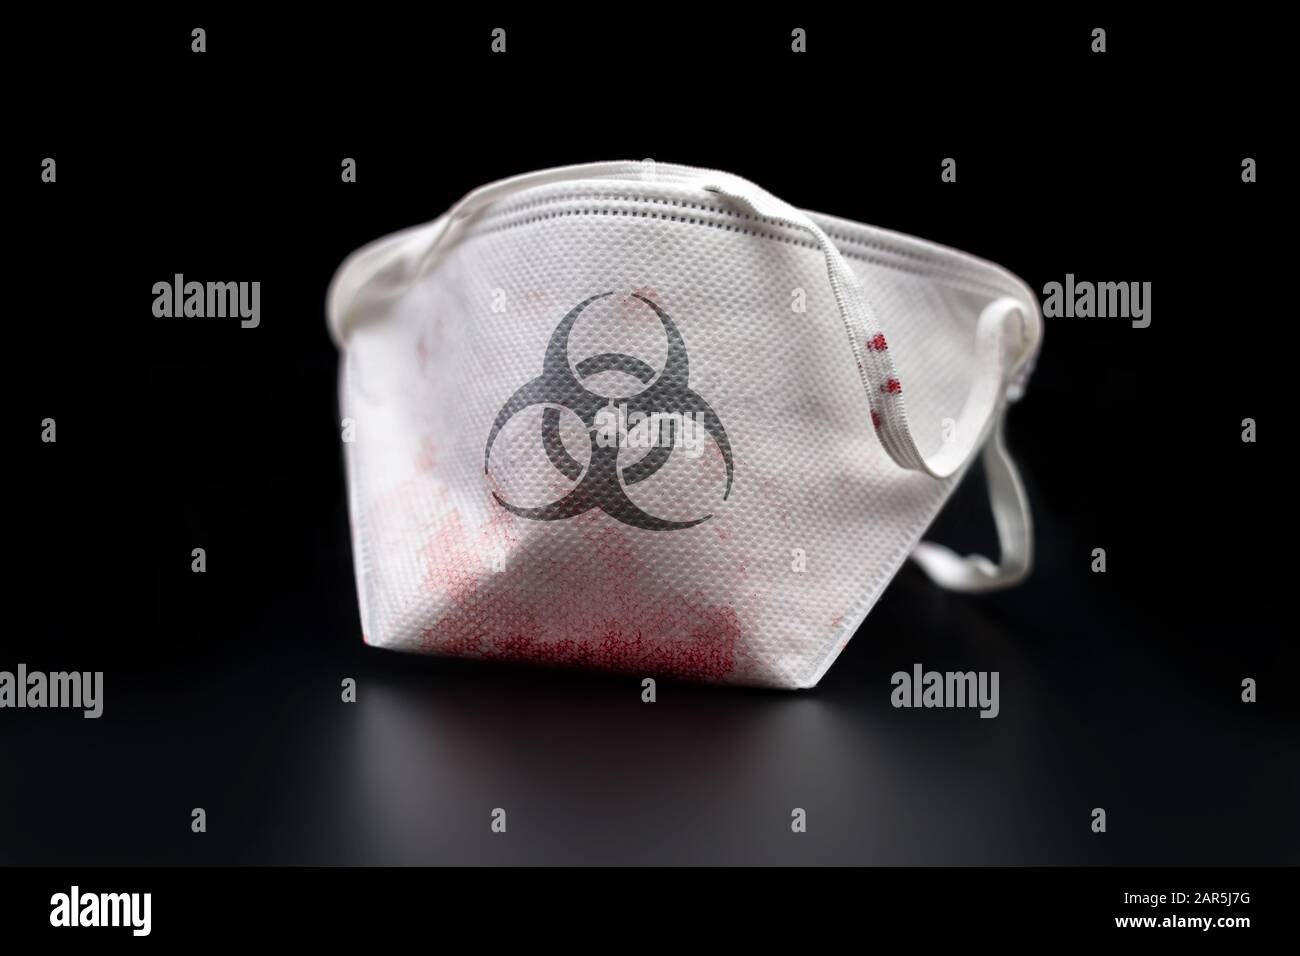 Blood-stained safety mask with a biohazard symbol on it, aftermath of a biological infection (isolated on a black background). Stock Photo